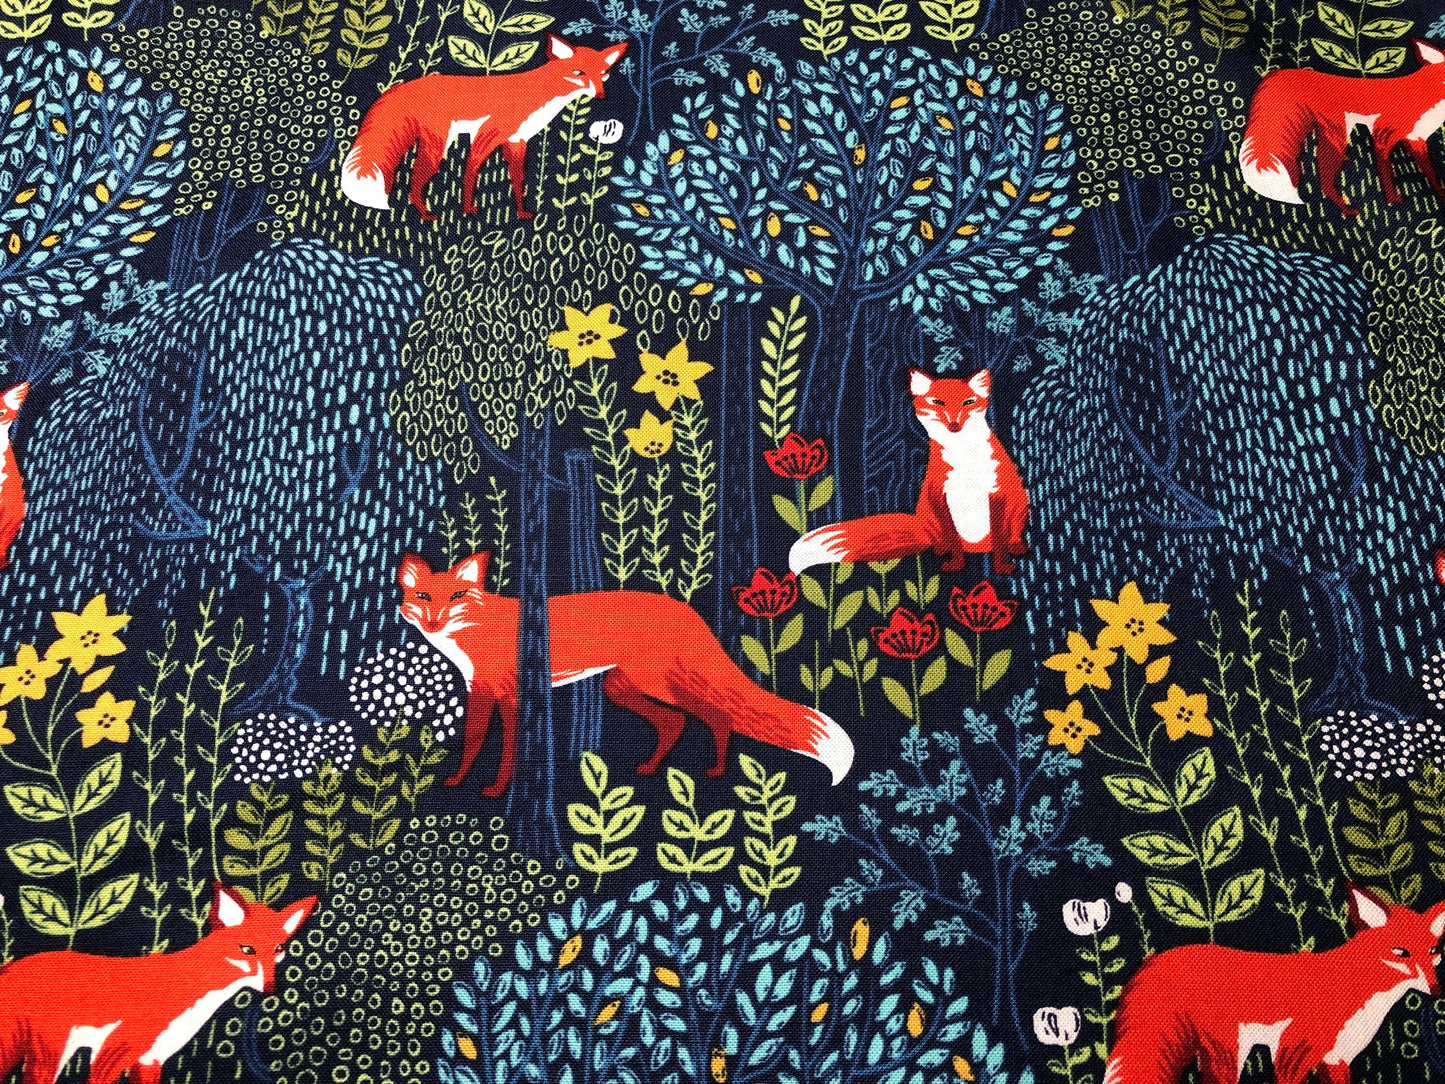 INTO THE WOODS in Nite, Woodland Fabric, Fox Fabric, Michael Miller Fabrics, Woodland Baby Quilt, Quilt Fabric, Quilting, Fabric By the Yard